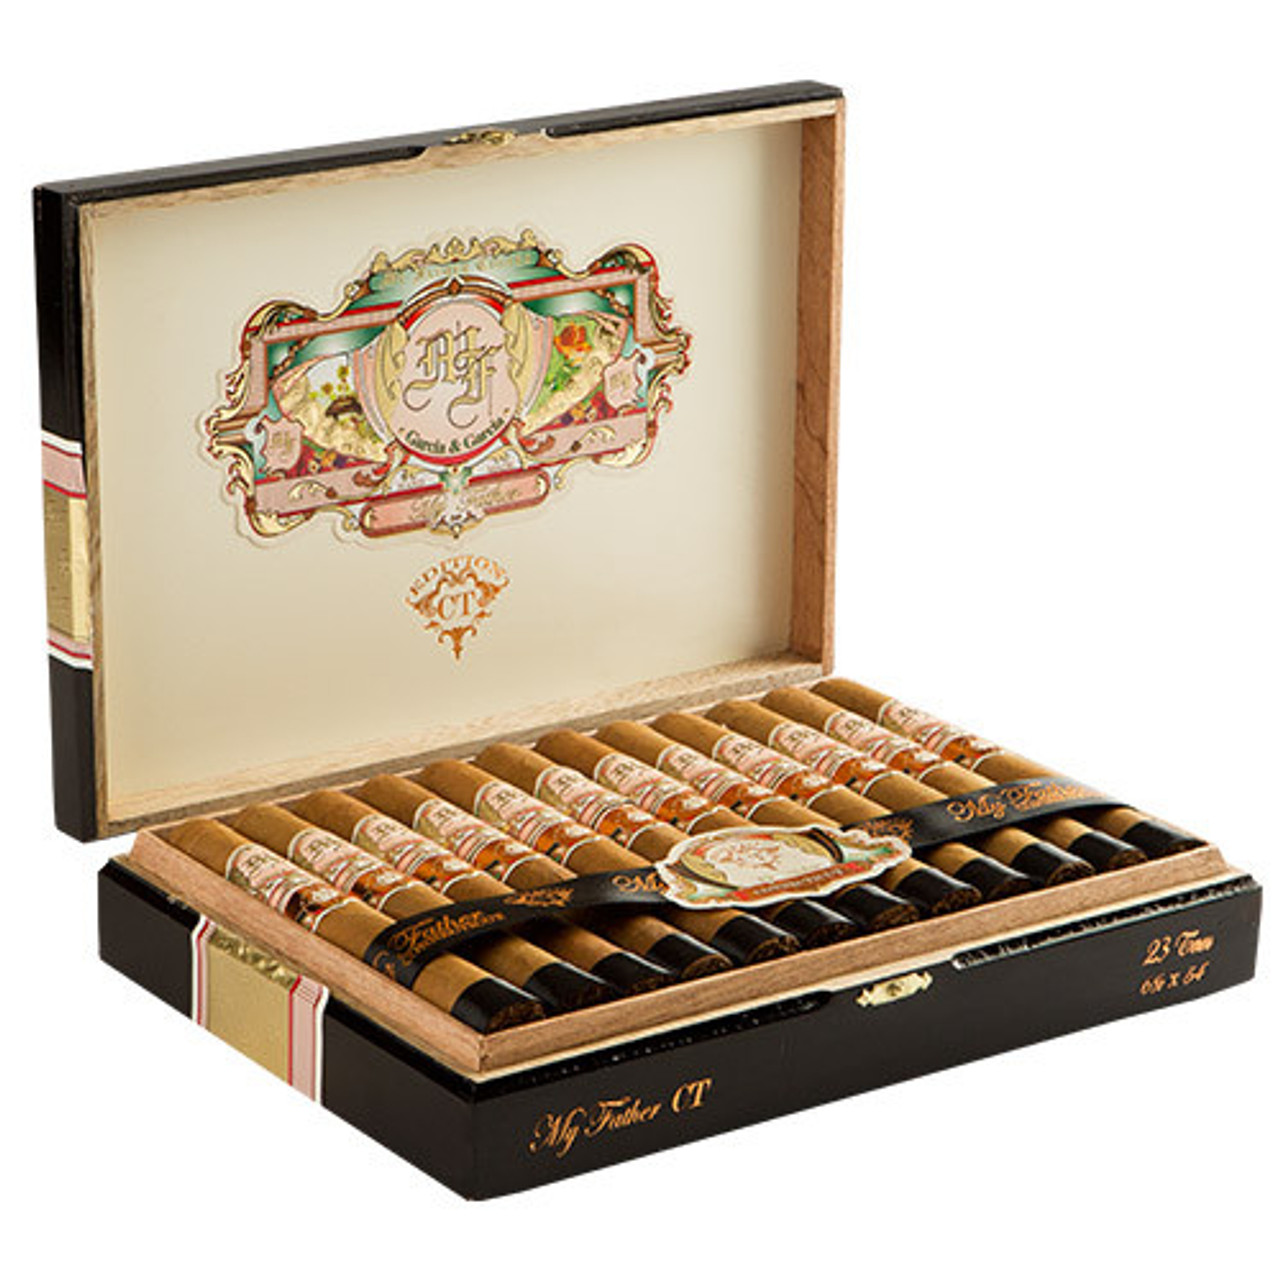 My Father Connecticut Toro Cigars - 6.5 x 54 (Box of 23) Open